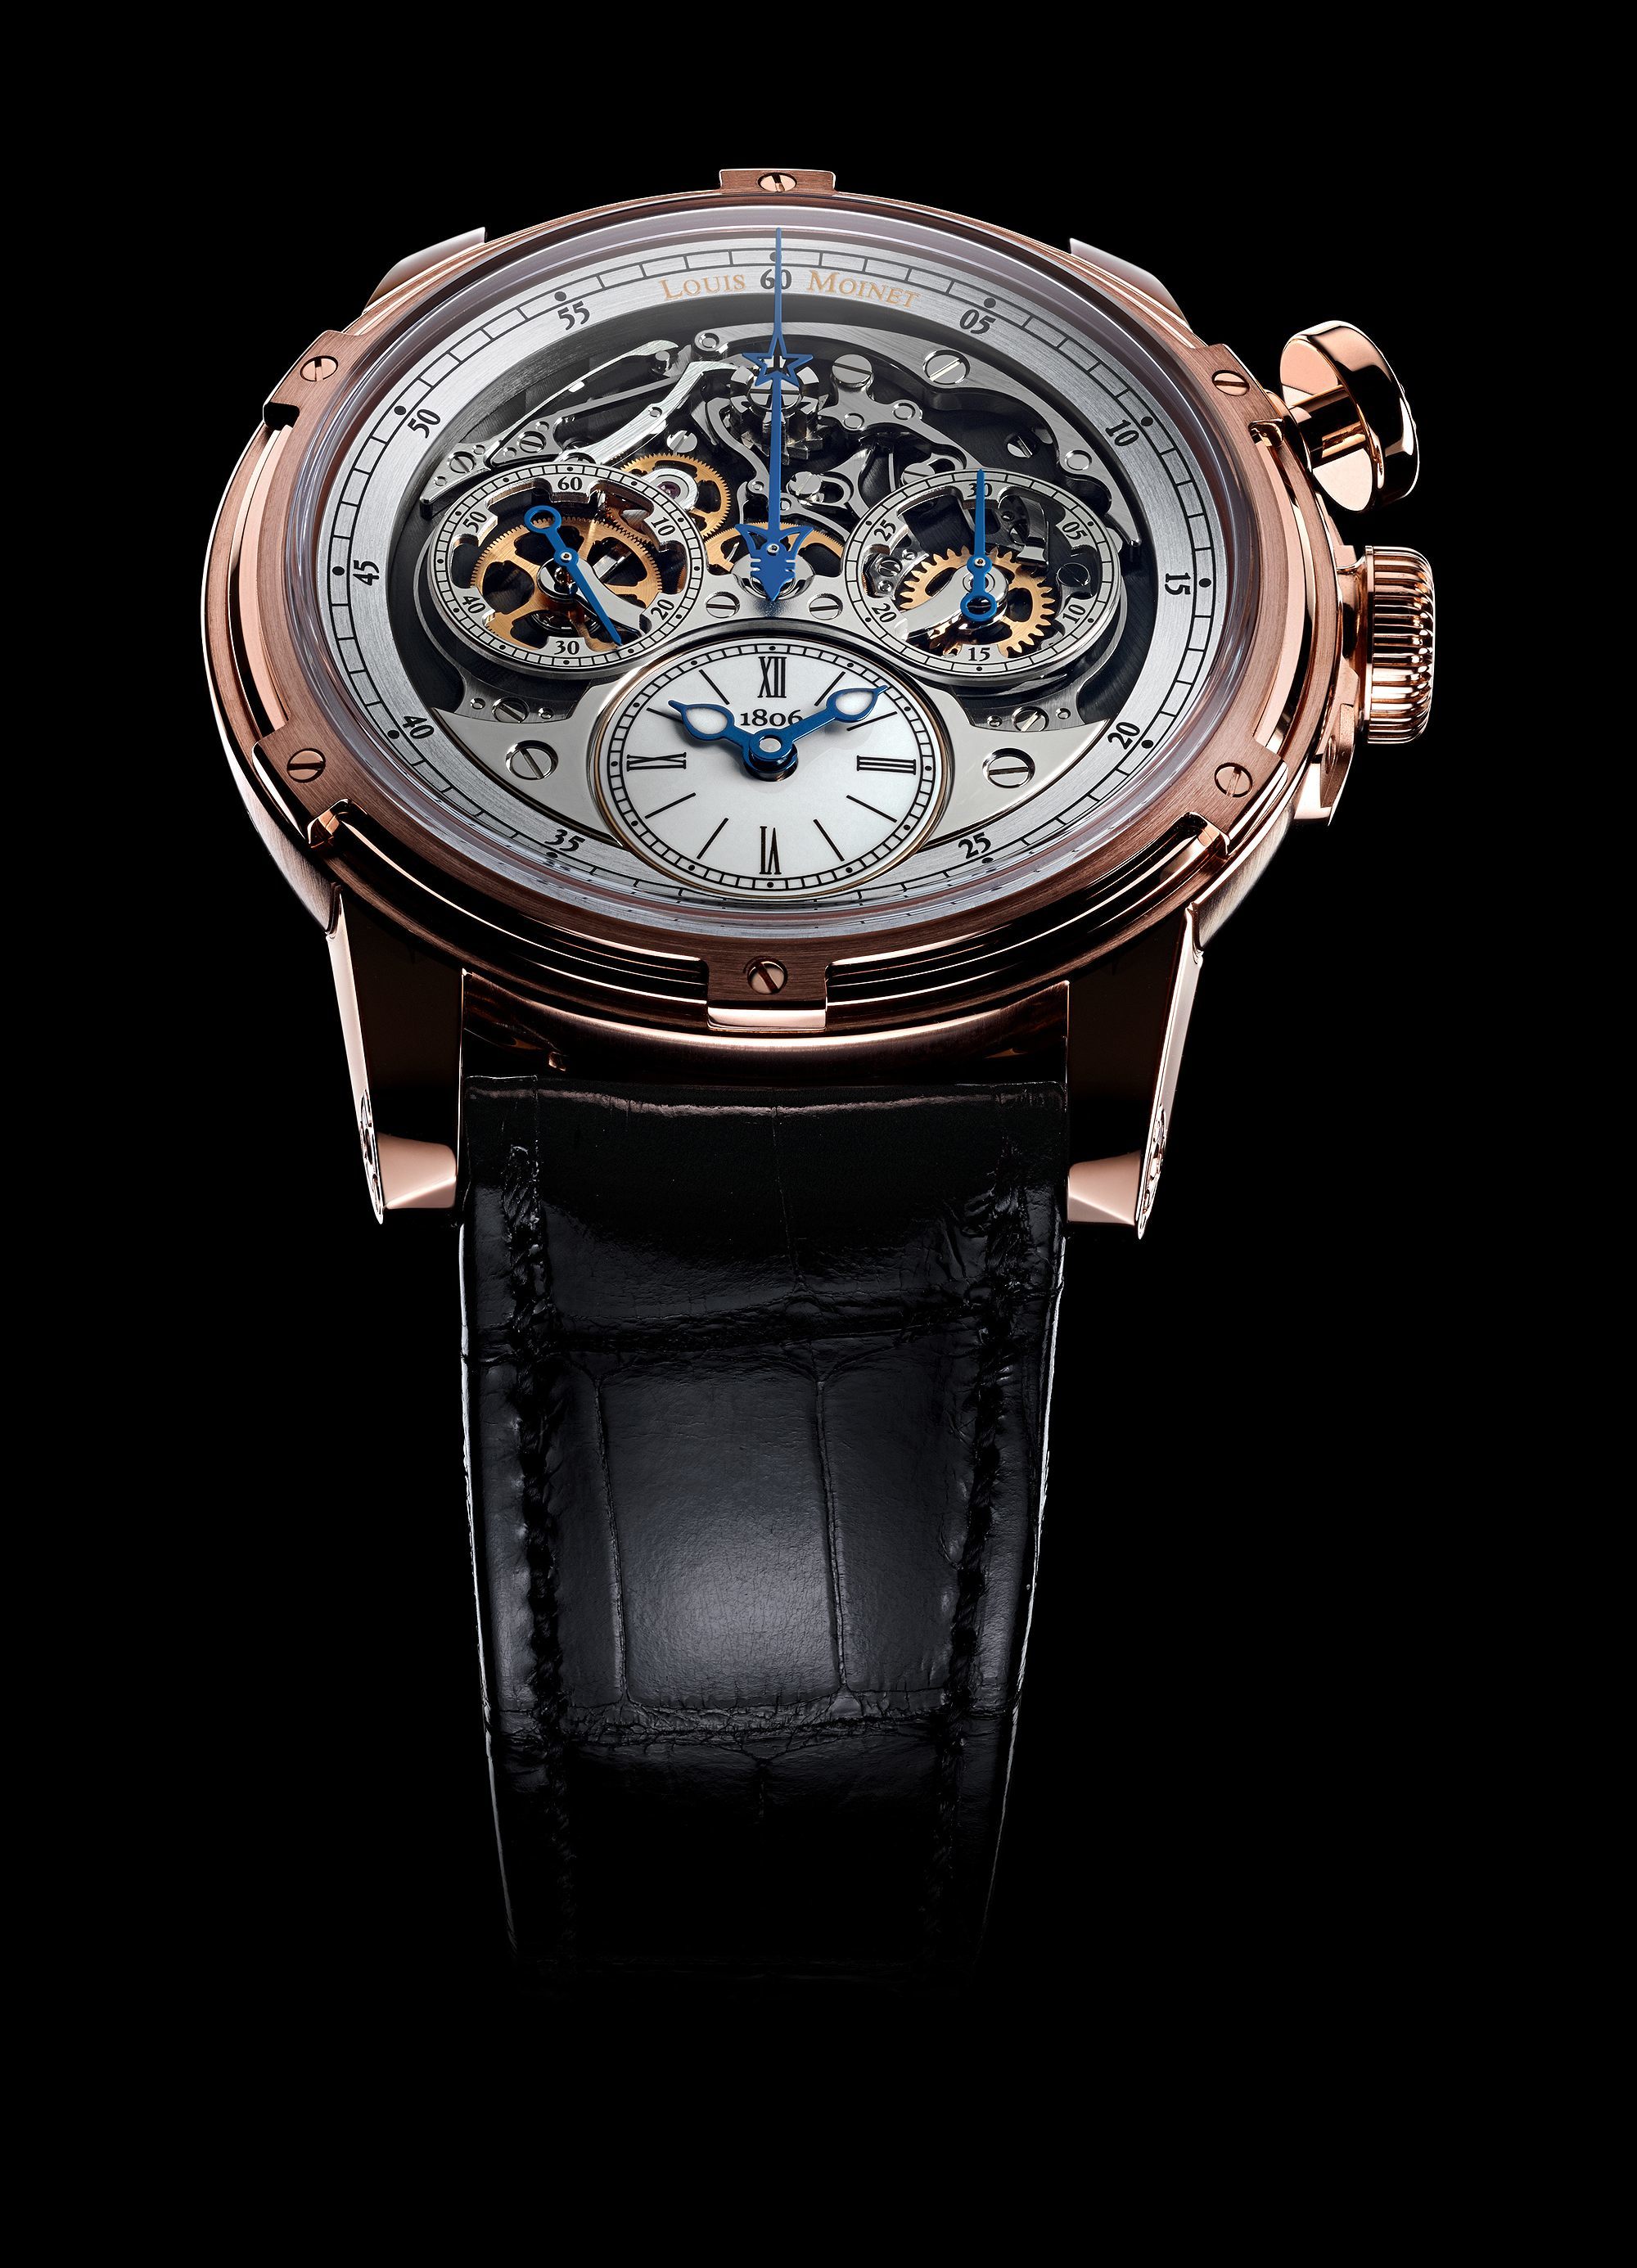 Memoris - Limited Edition by Louis Moinet - 18K Rose Gold